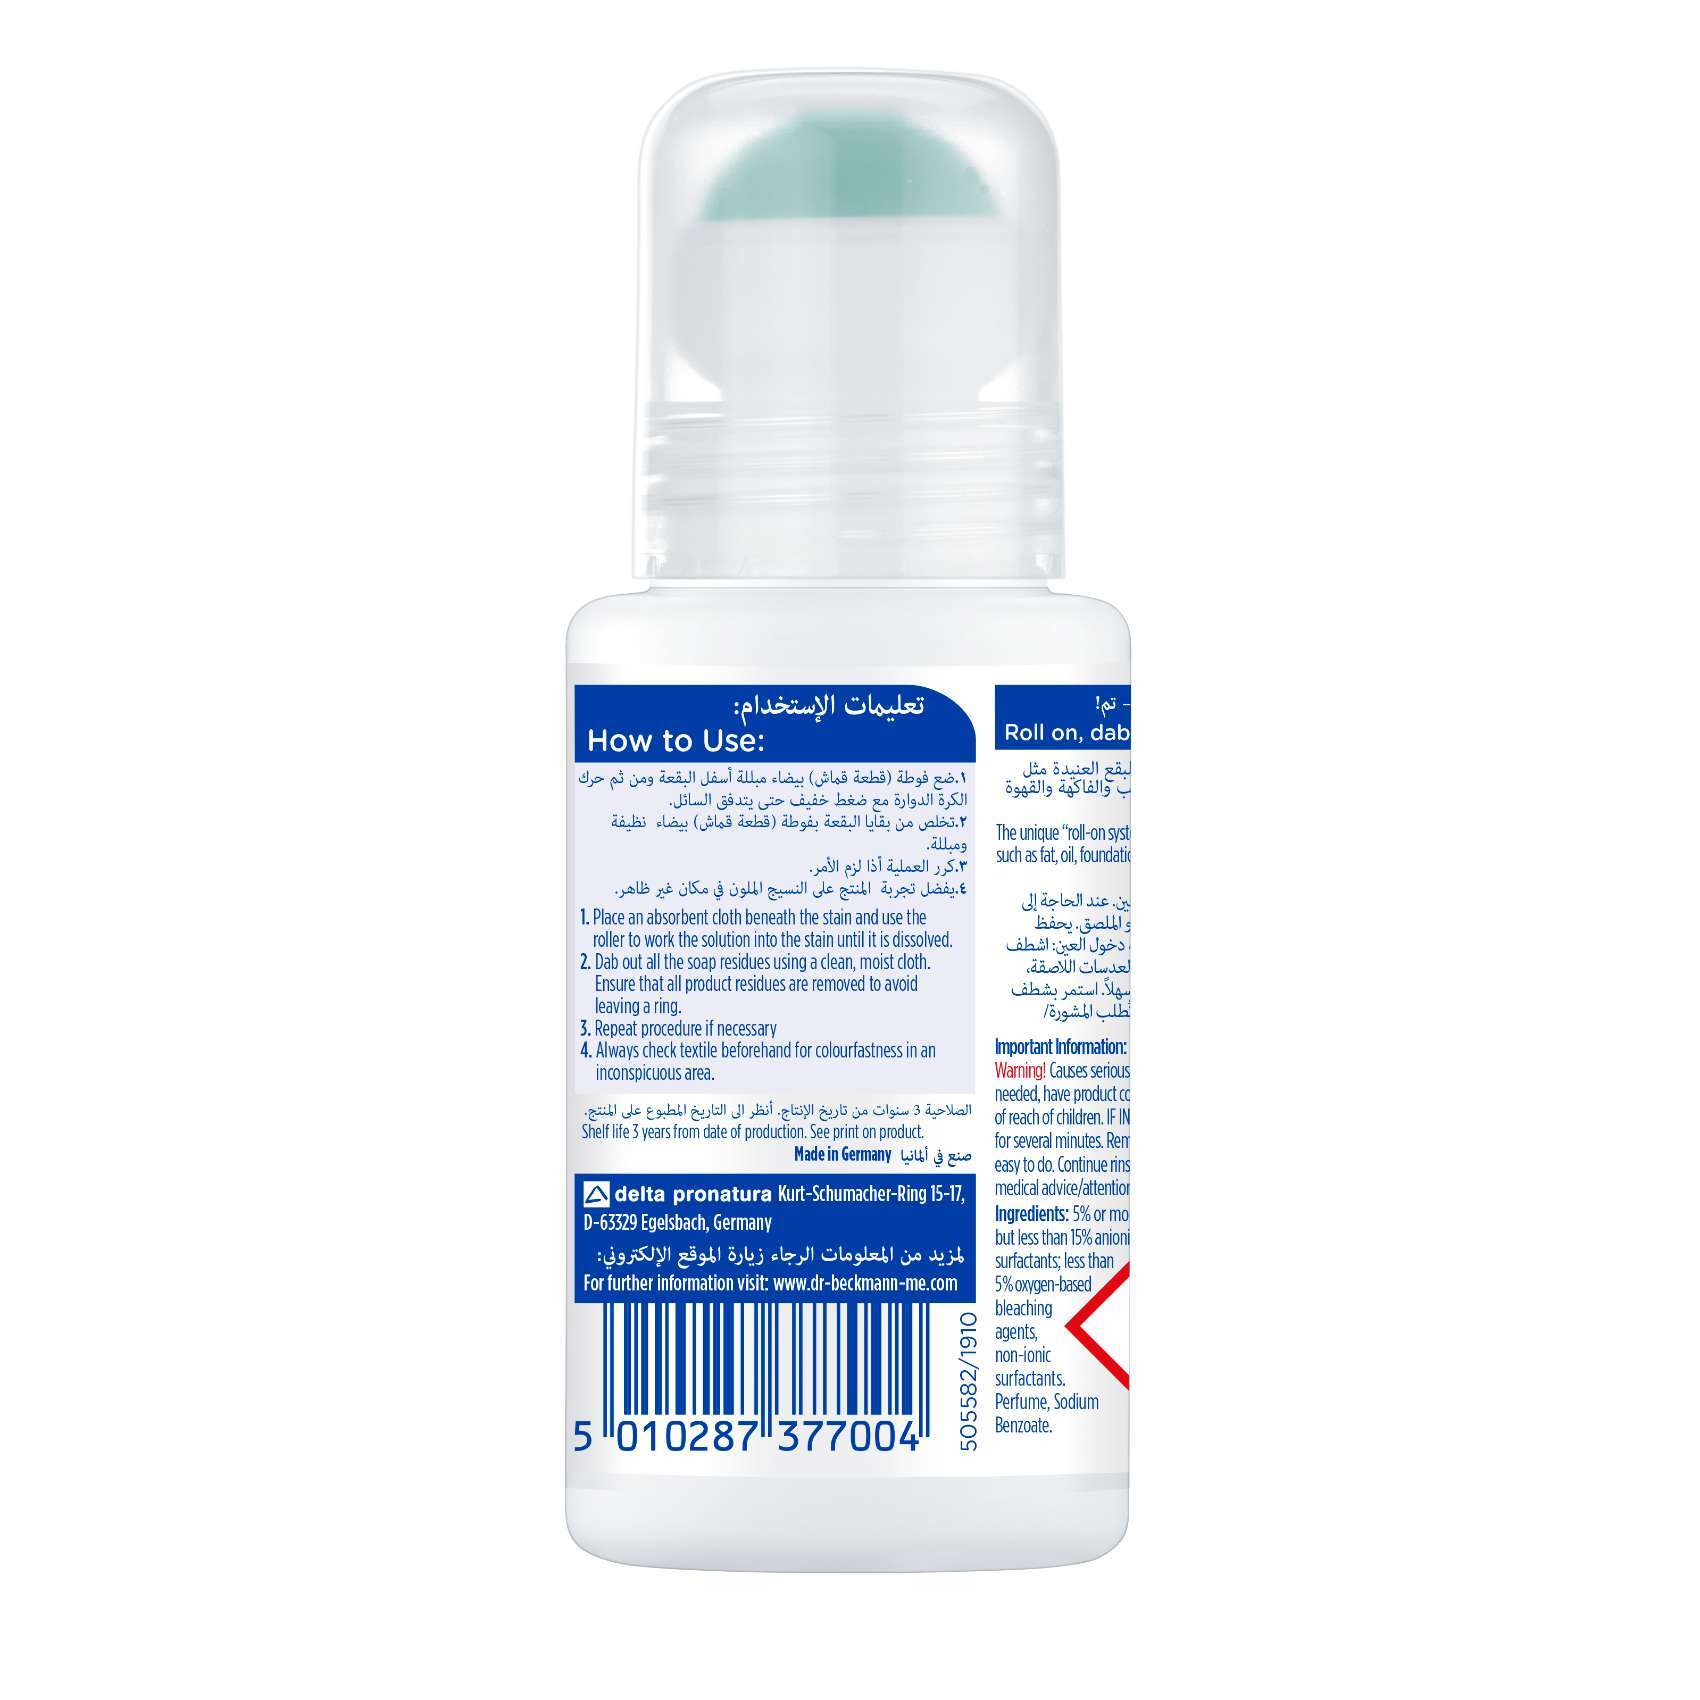 Dr.Beckmann Roll-on Stain Remover - TheEuroStore24